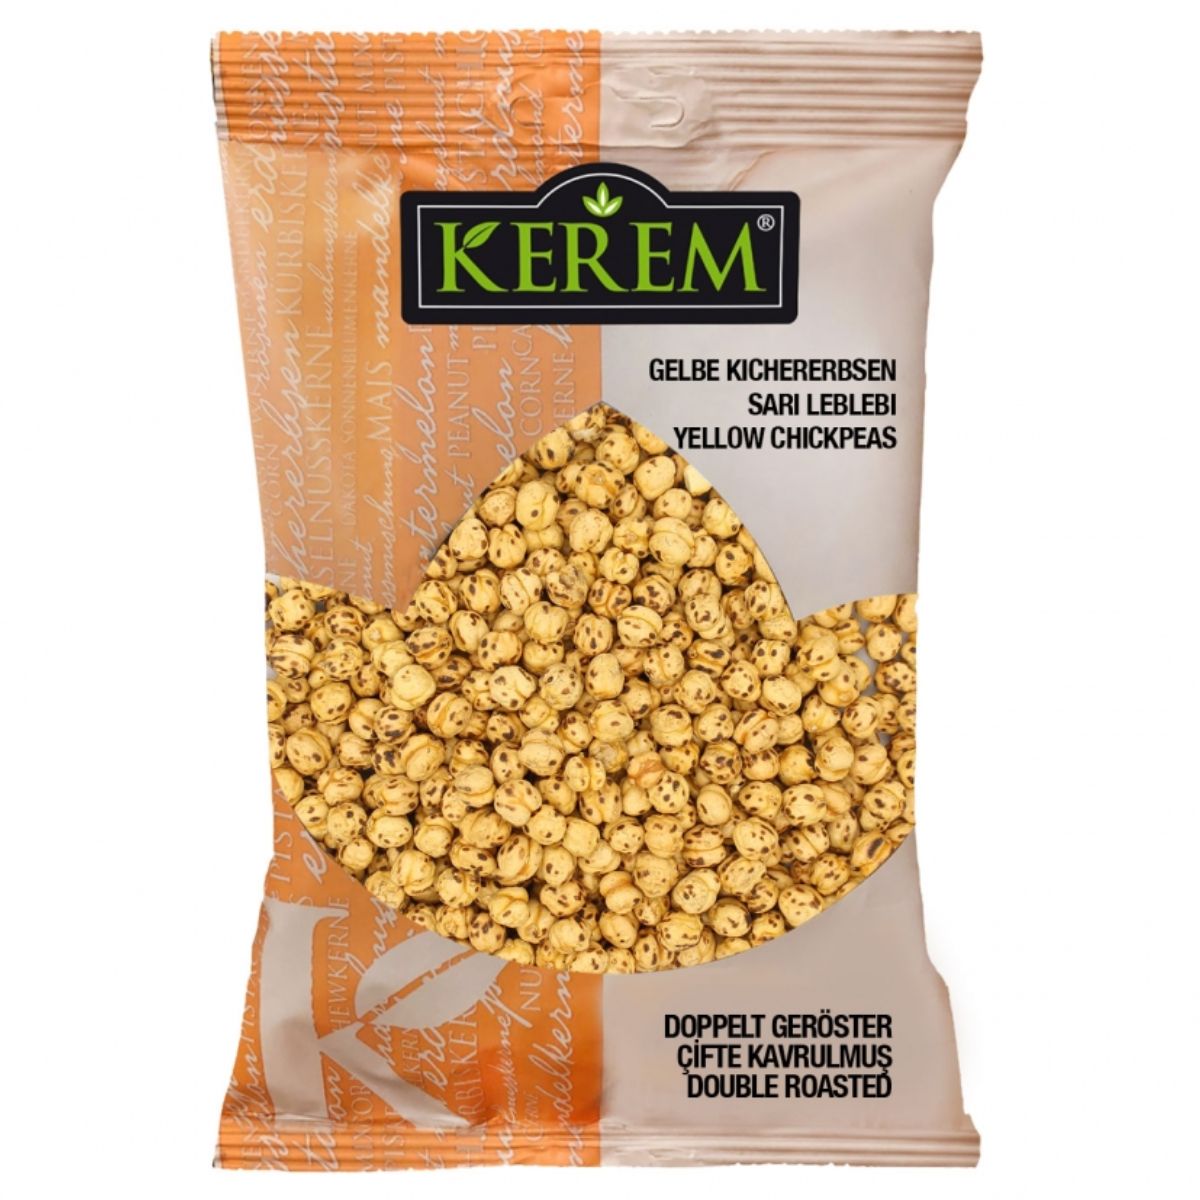 Kerem - Yellow Chickpeas Double Roasted - 225g popcorn in a bag.